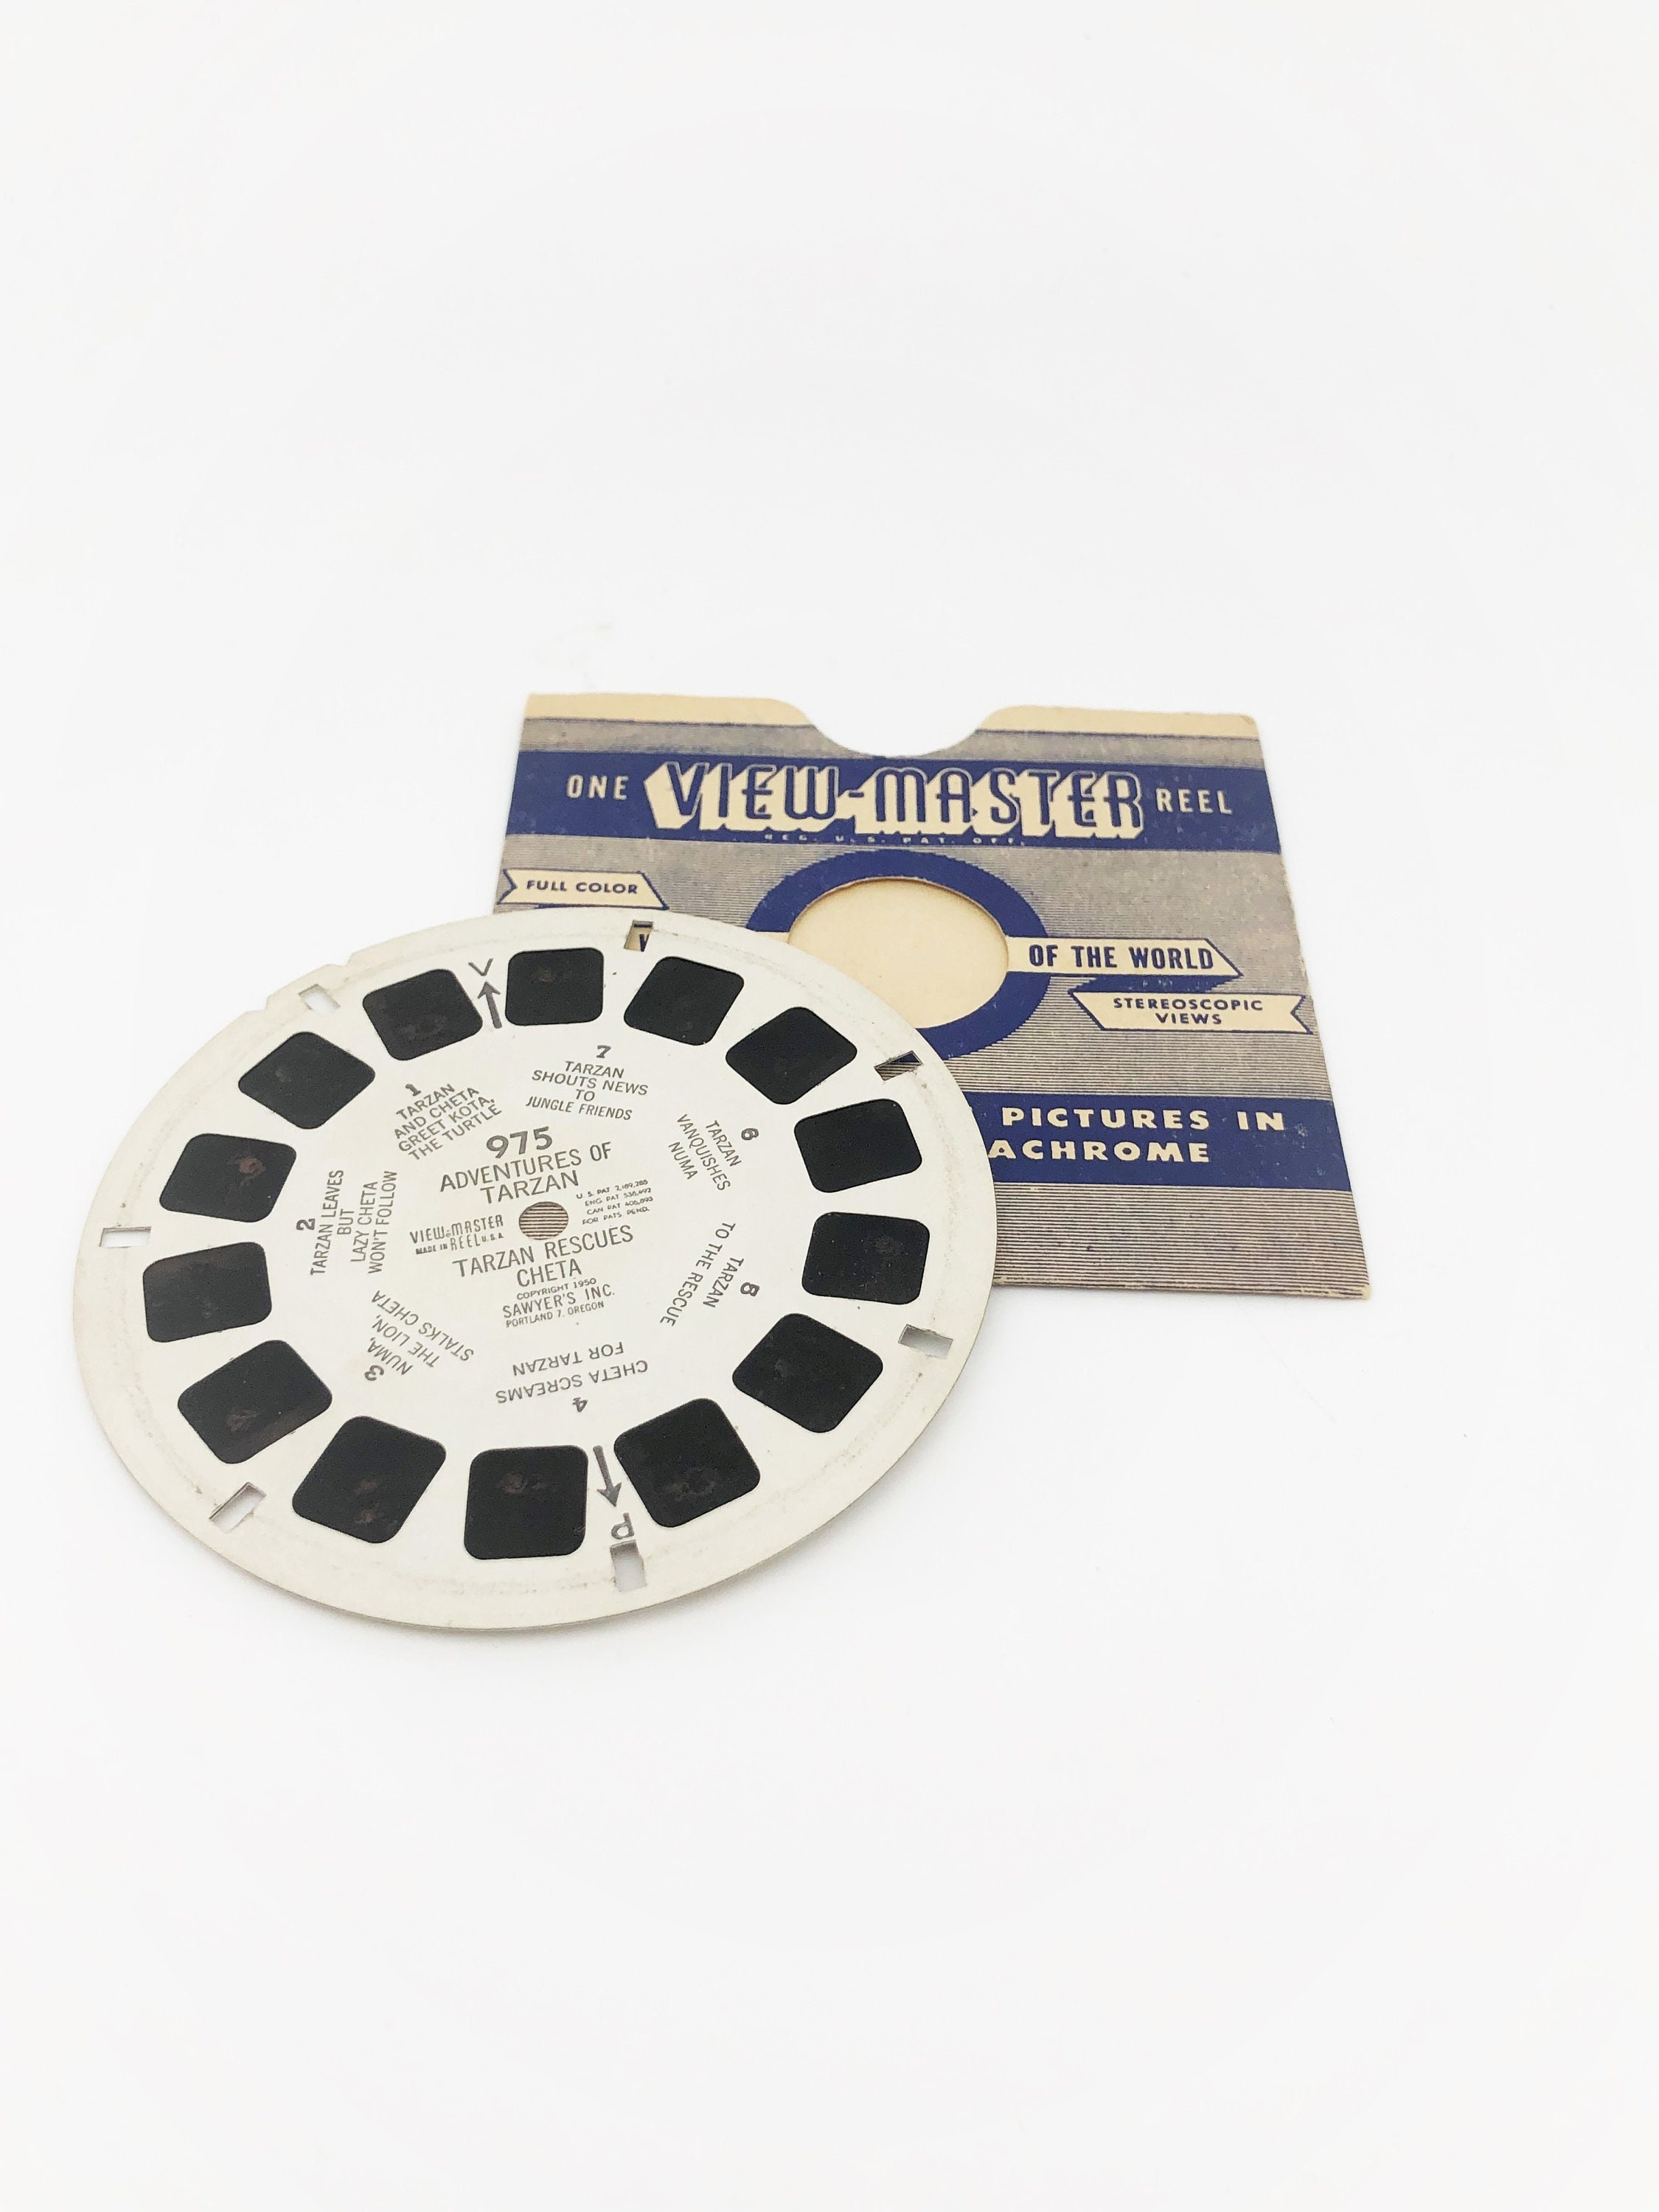 One View Master Reel